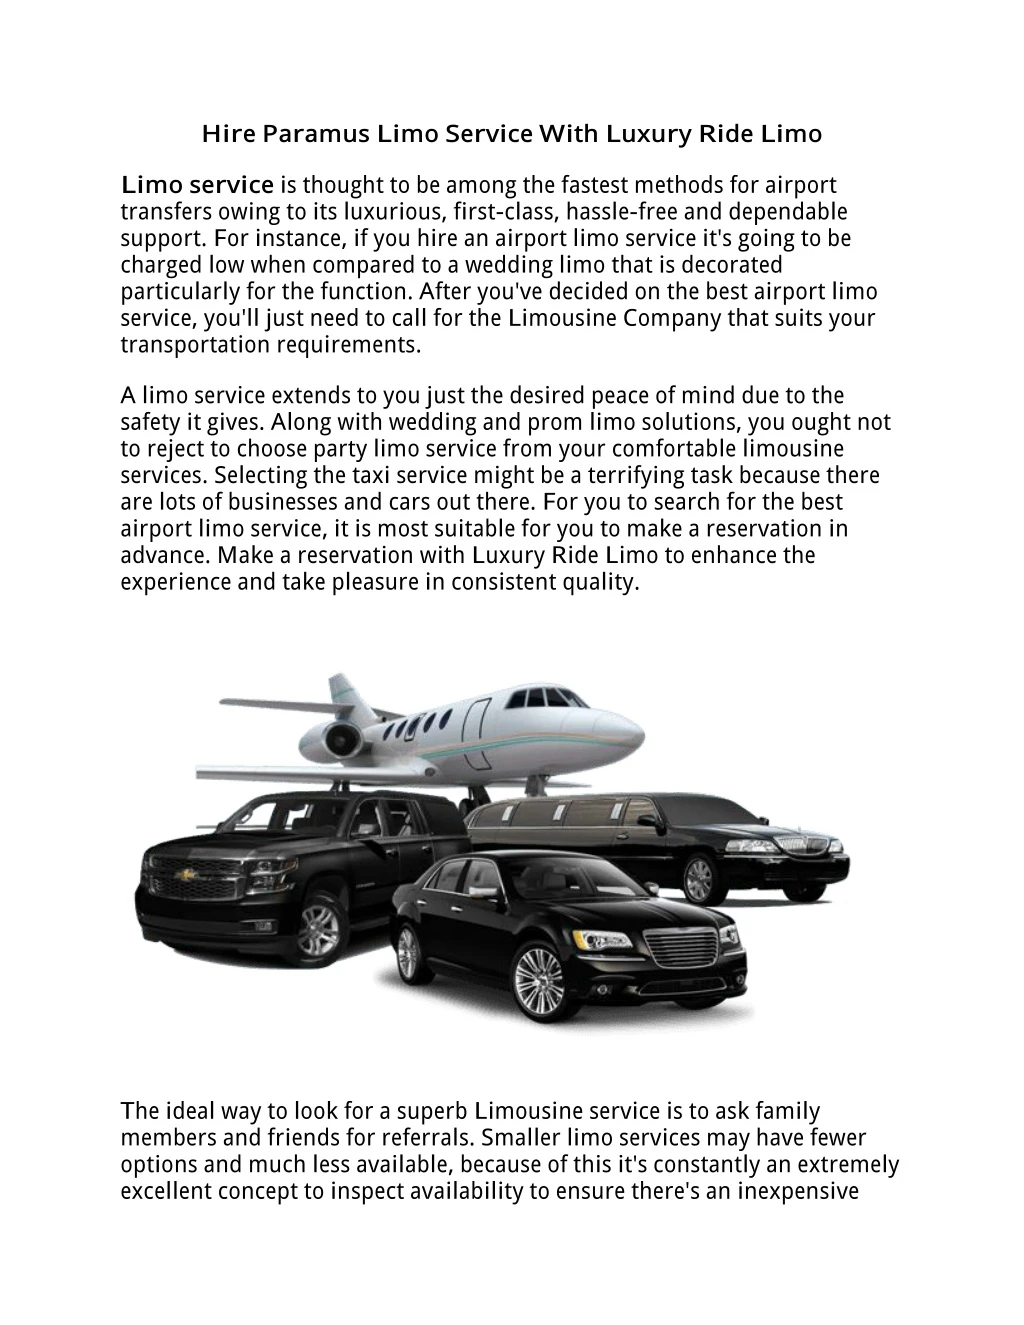 h ire paramus limo service w ith luxury r ide limo